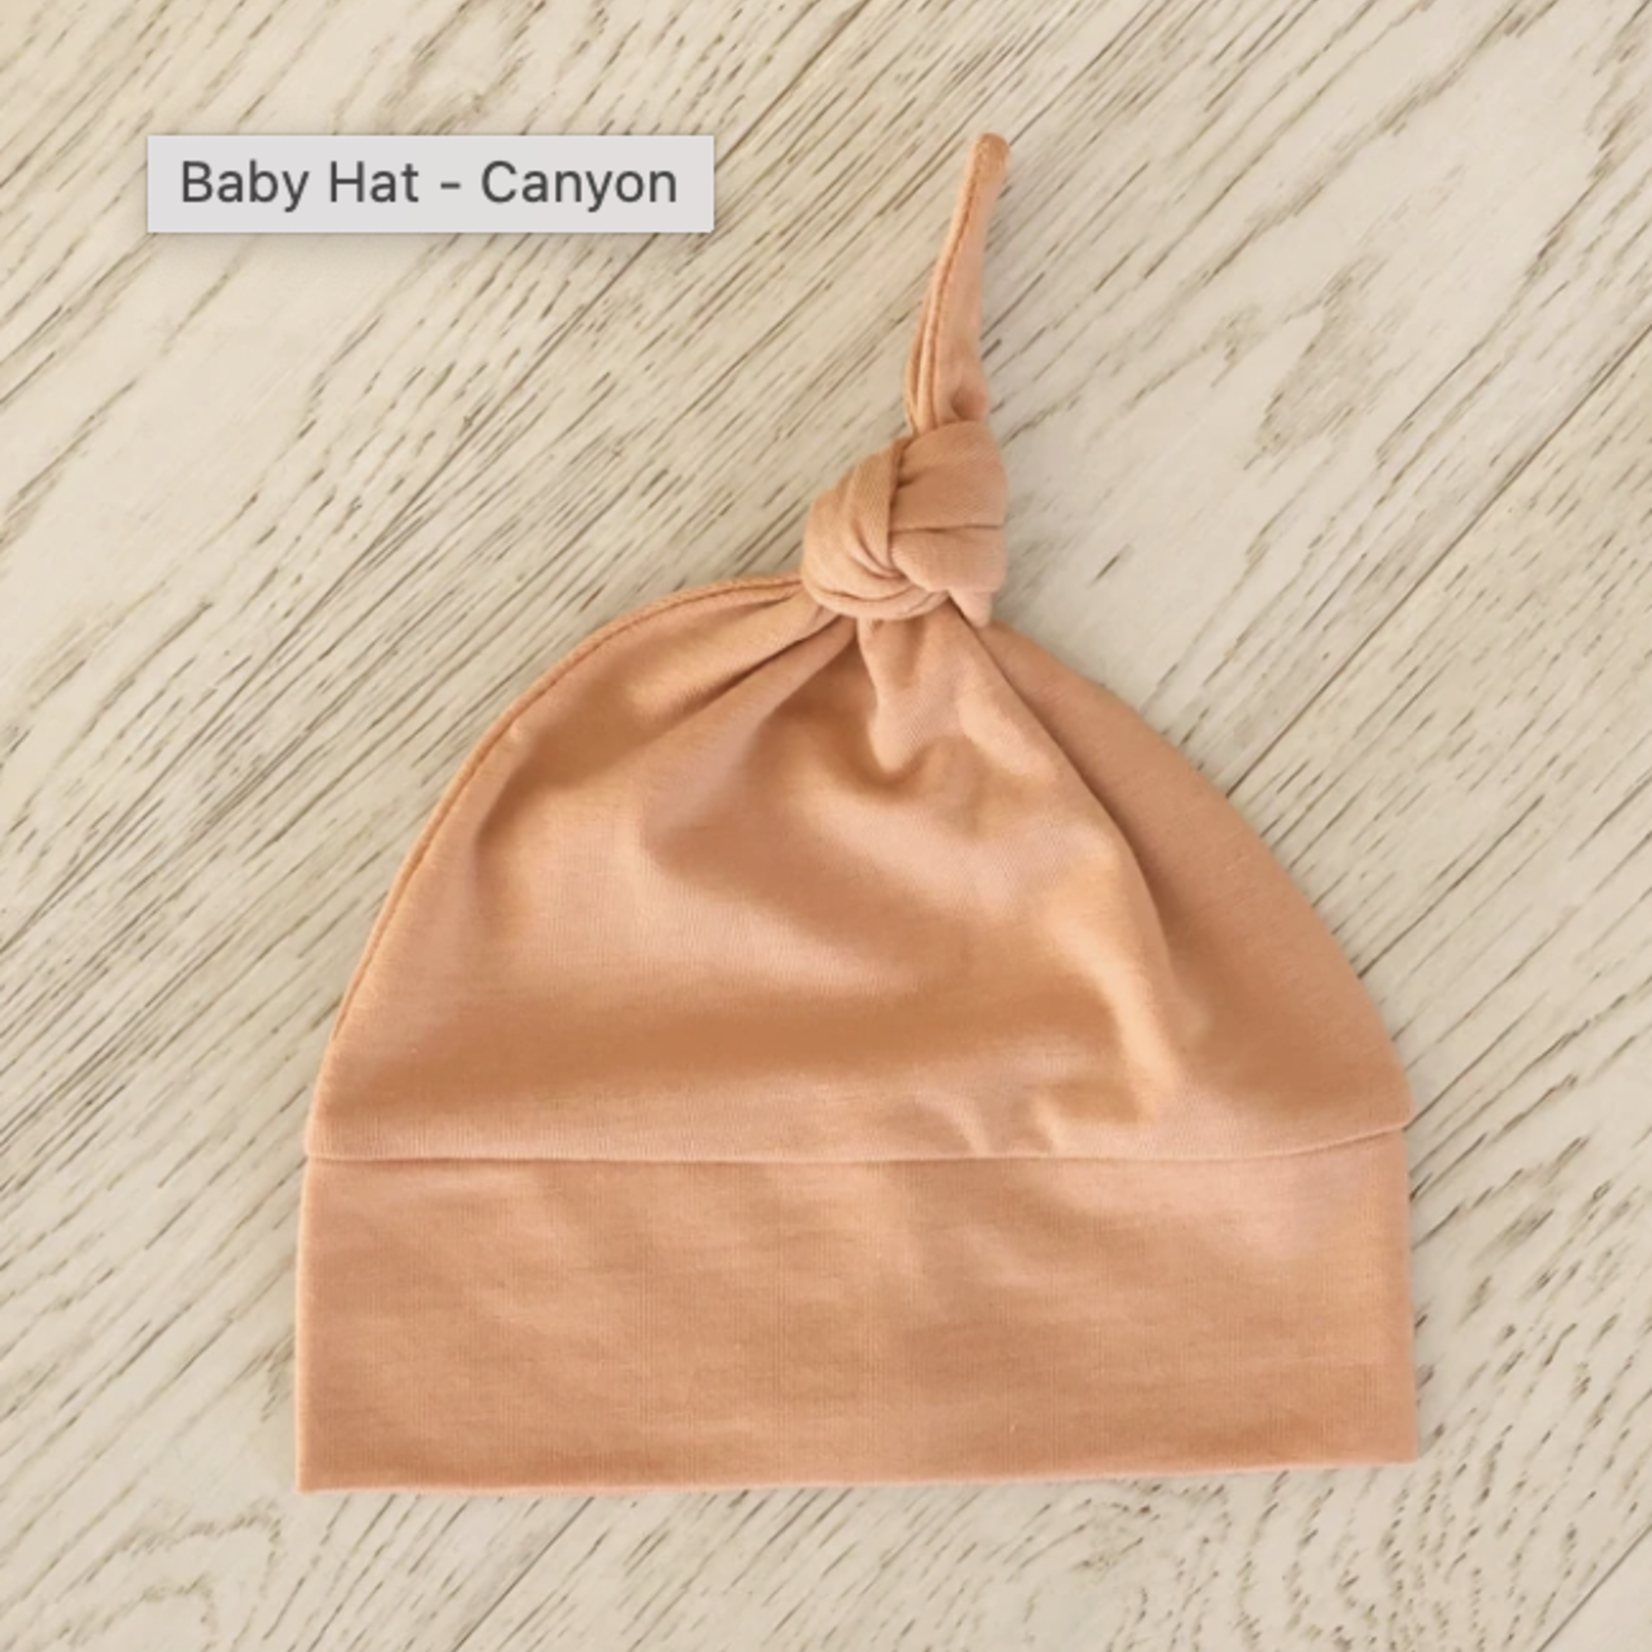 Jersey Baby Hat - Canyon